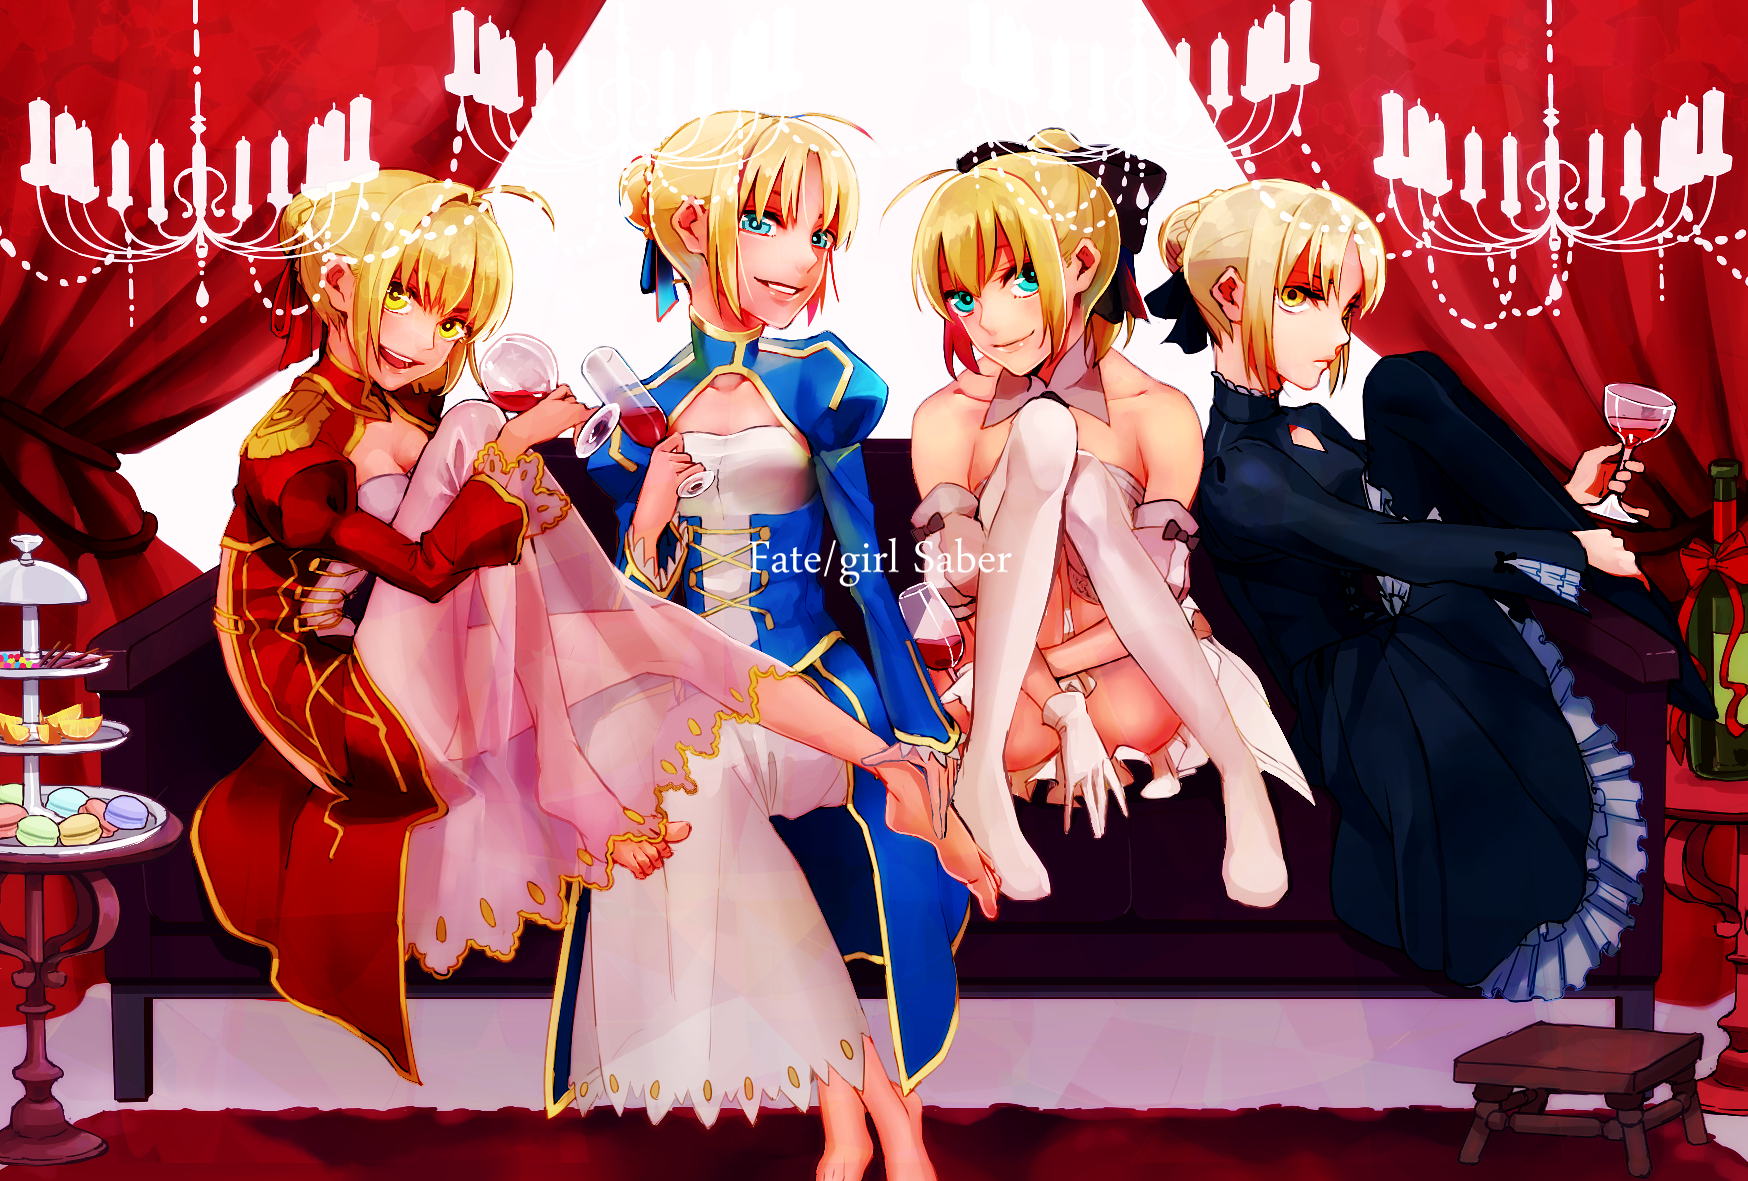 Anime 1748x1181 anime anime girls Fate series Fate/Stay Night Fate/Extra Fate/Extra CCC Fate/Unlimited Codes  fate/stay night: heaven's feel Saber Artoria Pendragon Nero Claudius Saber Lily Saber Alter blonde